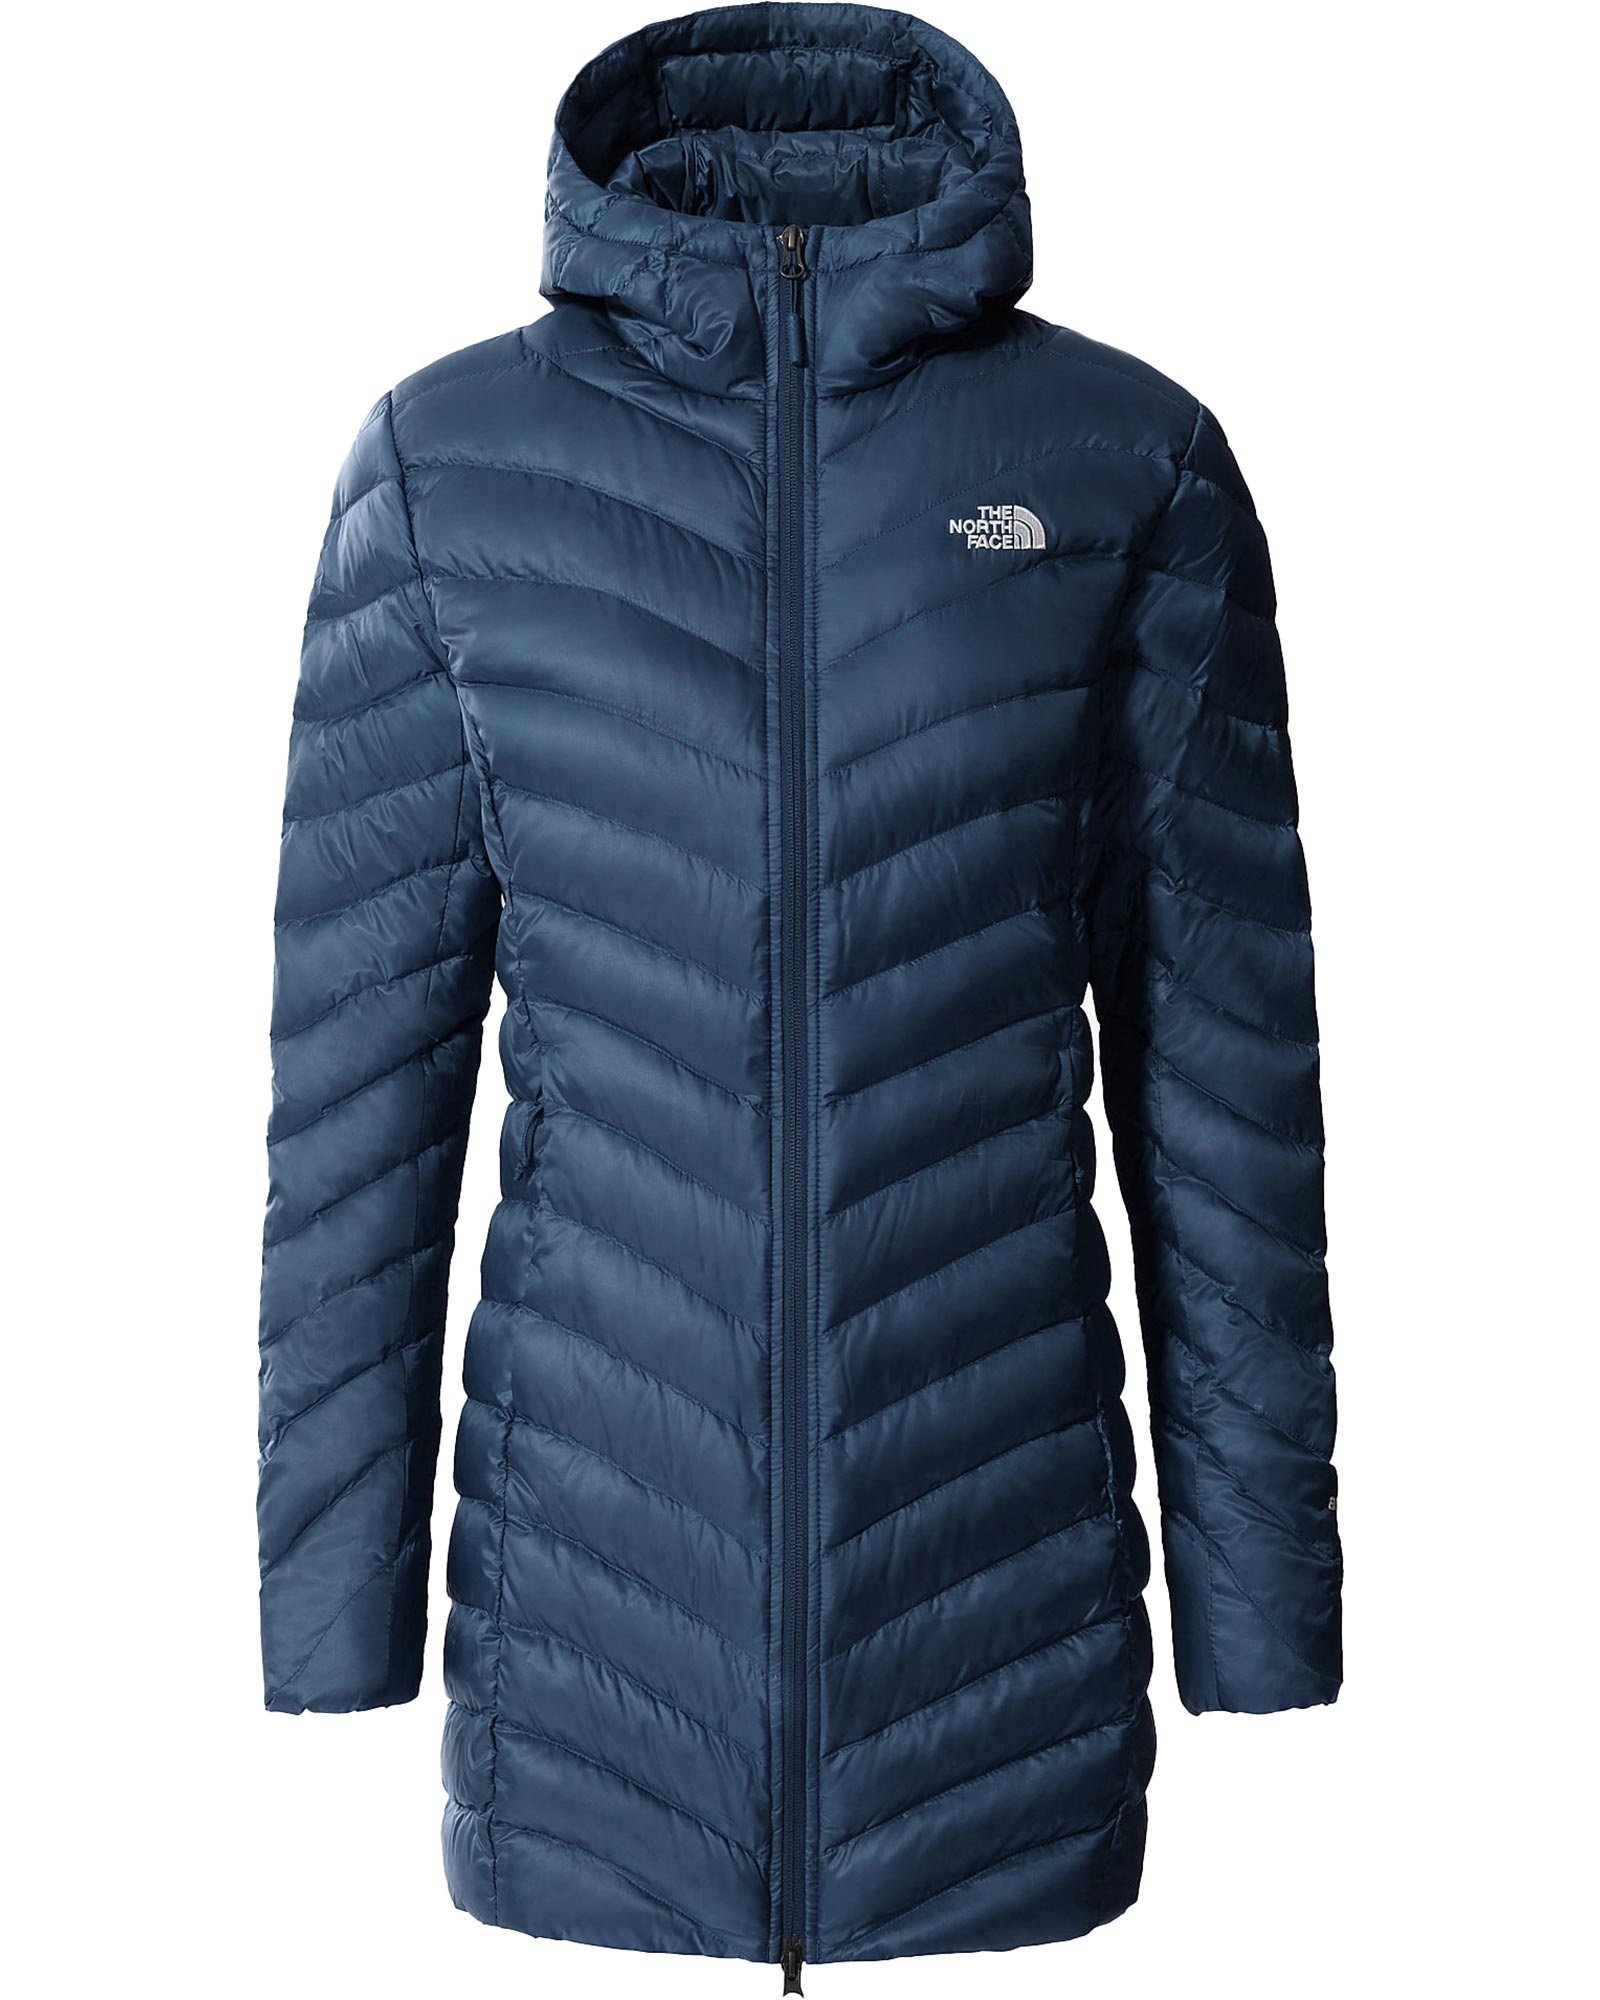 The North Face Trevail Womens Parka Jacket